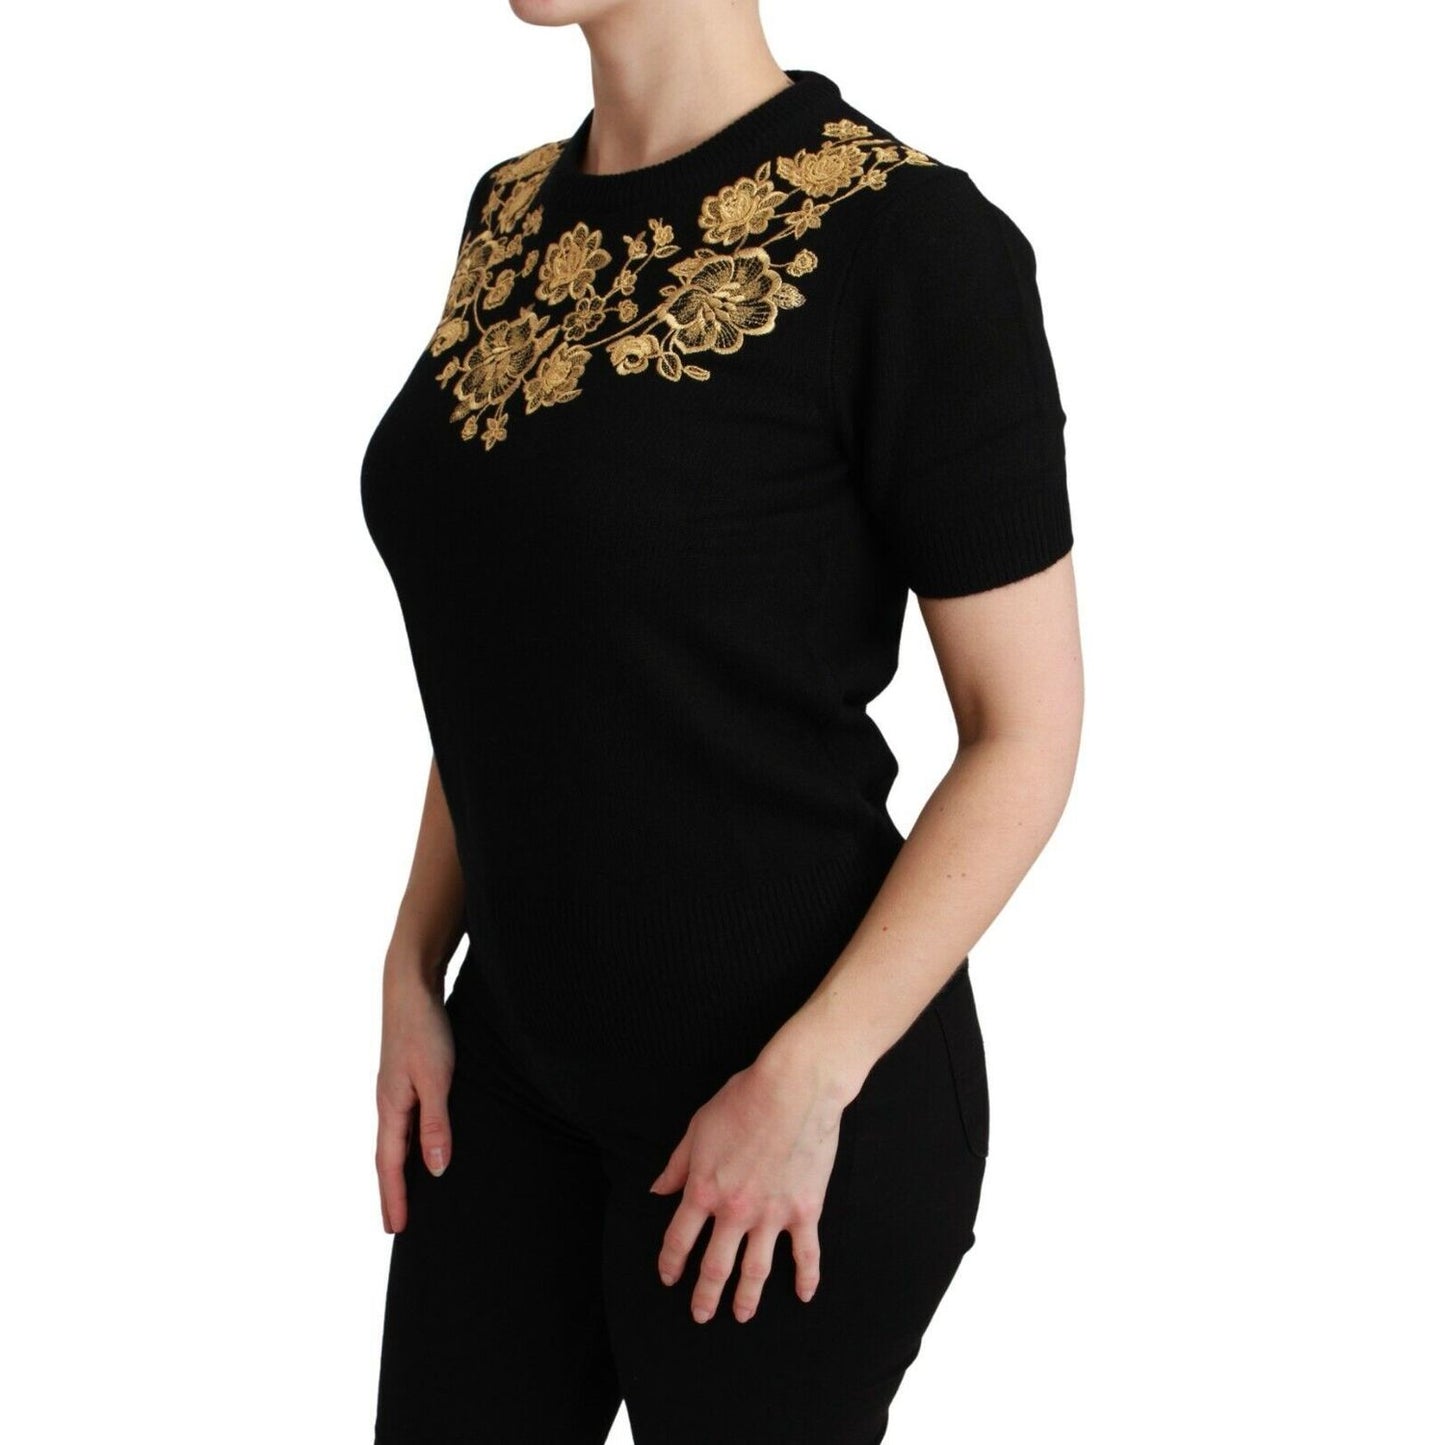 Dolce & Gabbana Elegant Black Cashmere Sweater Top WOMAN TOPS AND SHIRTS black-cashmere-gold-floral-sweater-top-1